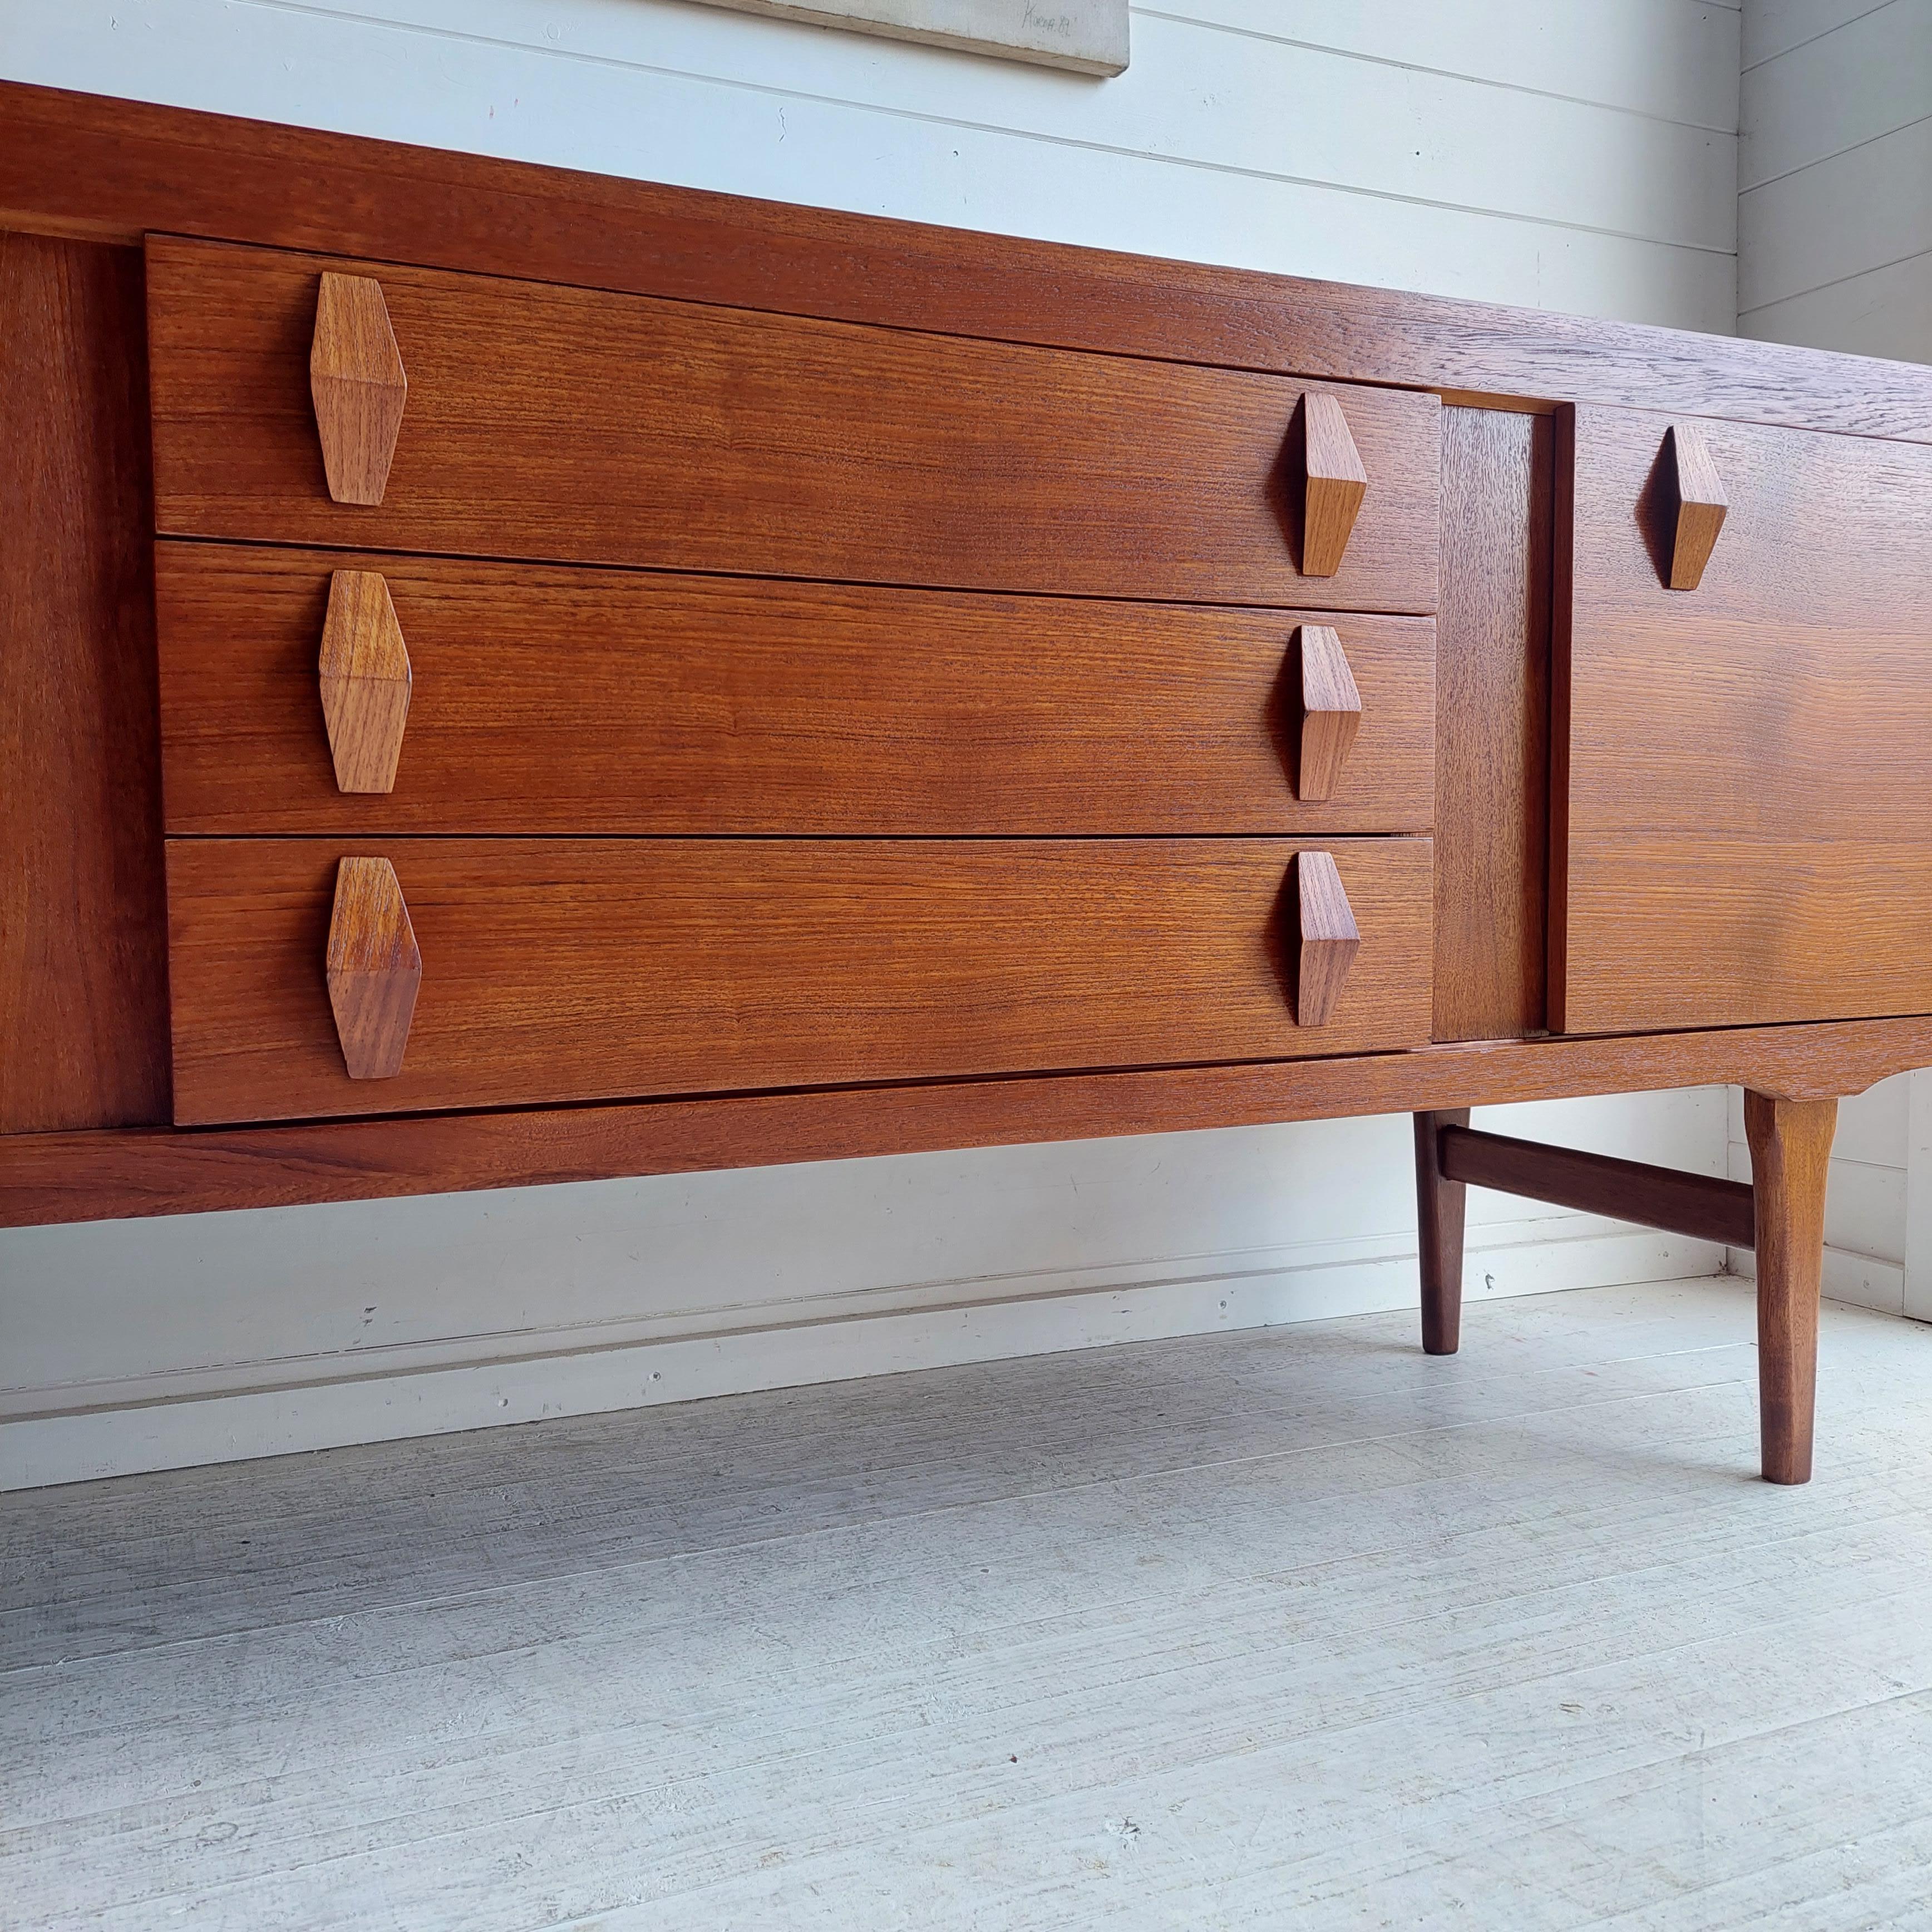 A superb vintage 60's/70's sideboard by Elliott's Of Newbury. from the 60s/70s
Finished in solid and veneered teak wood with beautiful grain patterns.
Sideboard with central bank of drawers and flanked by small single cupboard with geometric teak